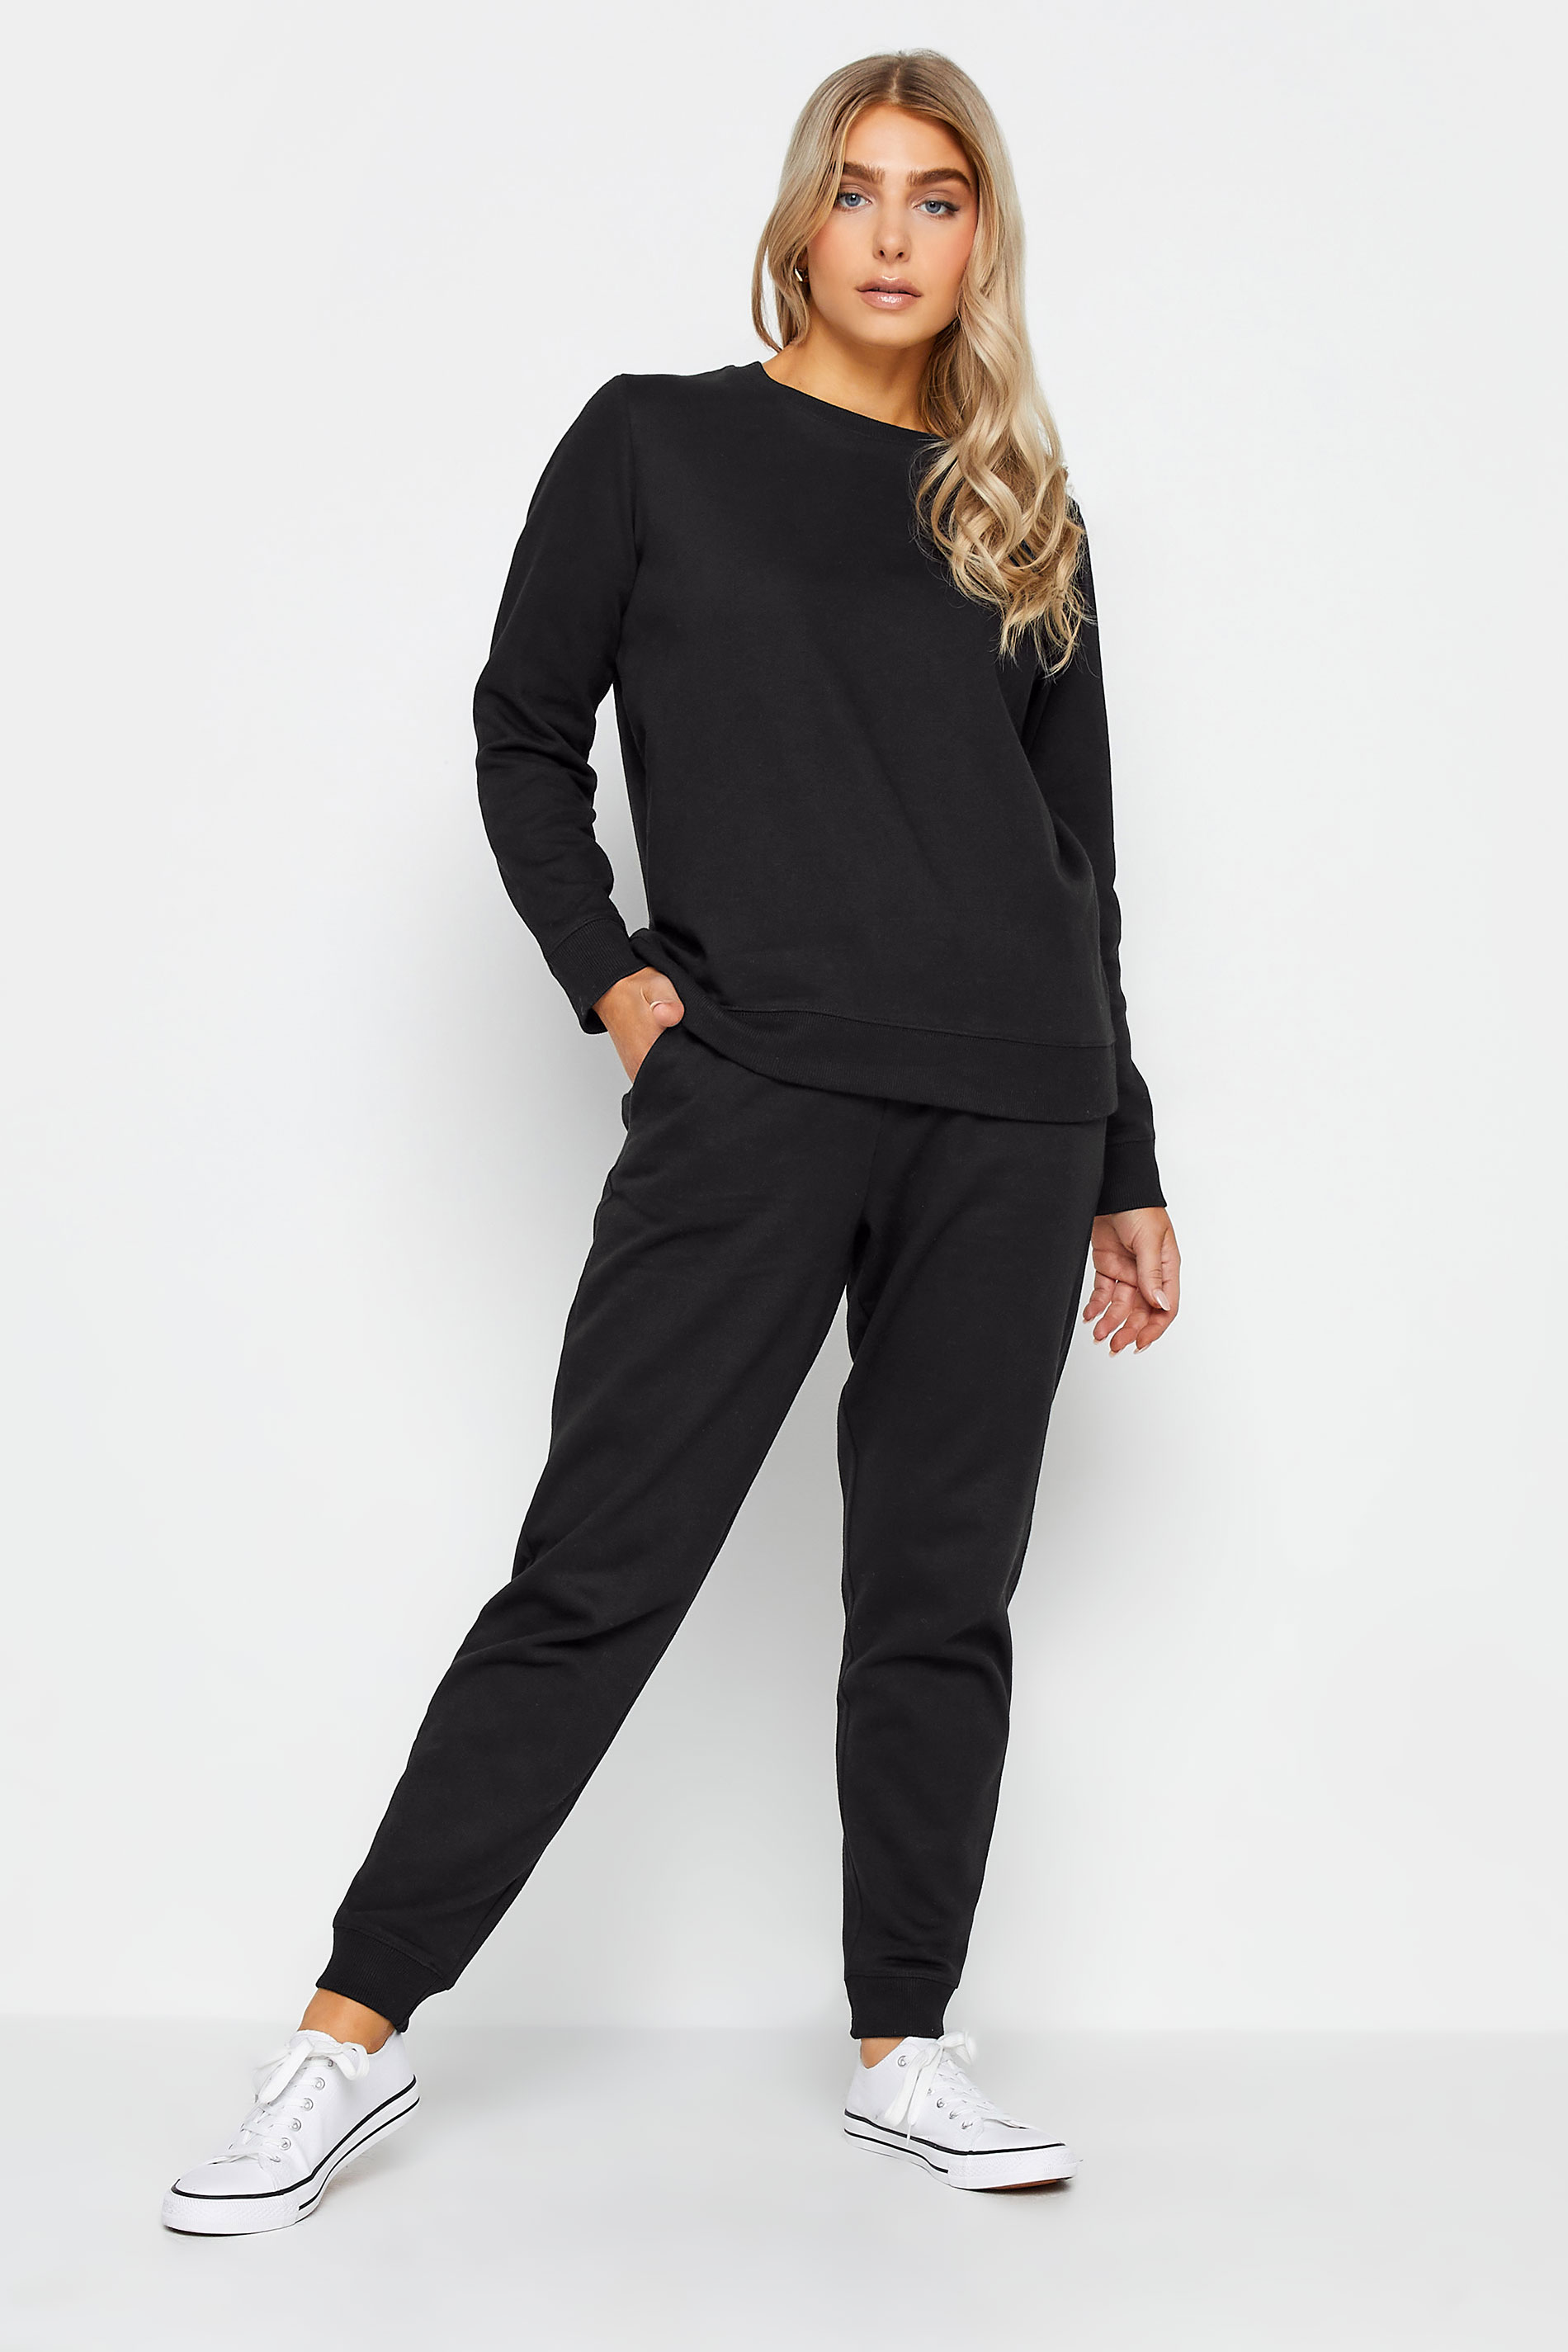 M&Co Black Essential Soft Touch Lounge Joggers | M&Co 2